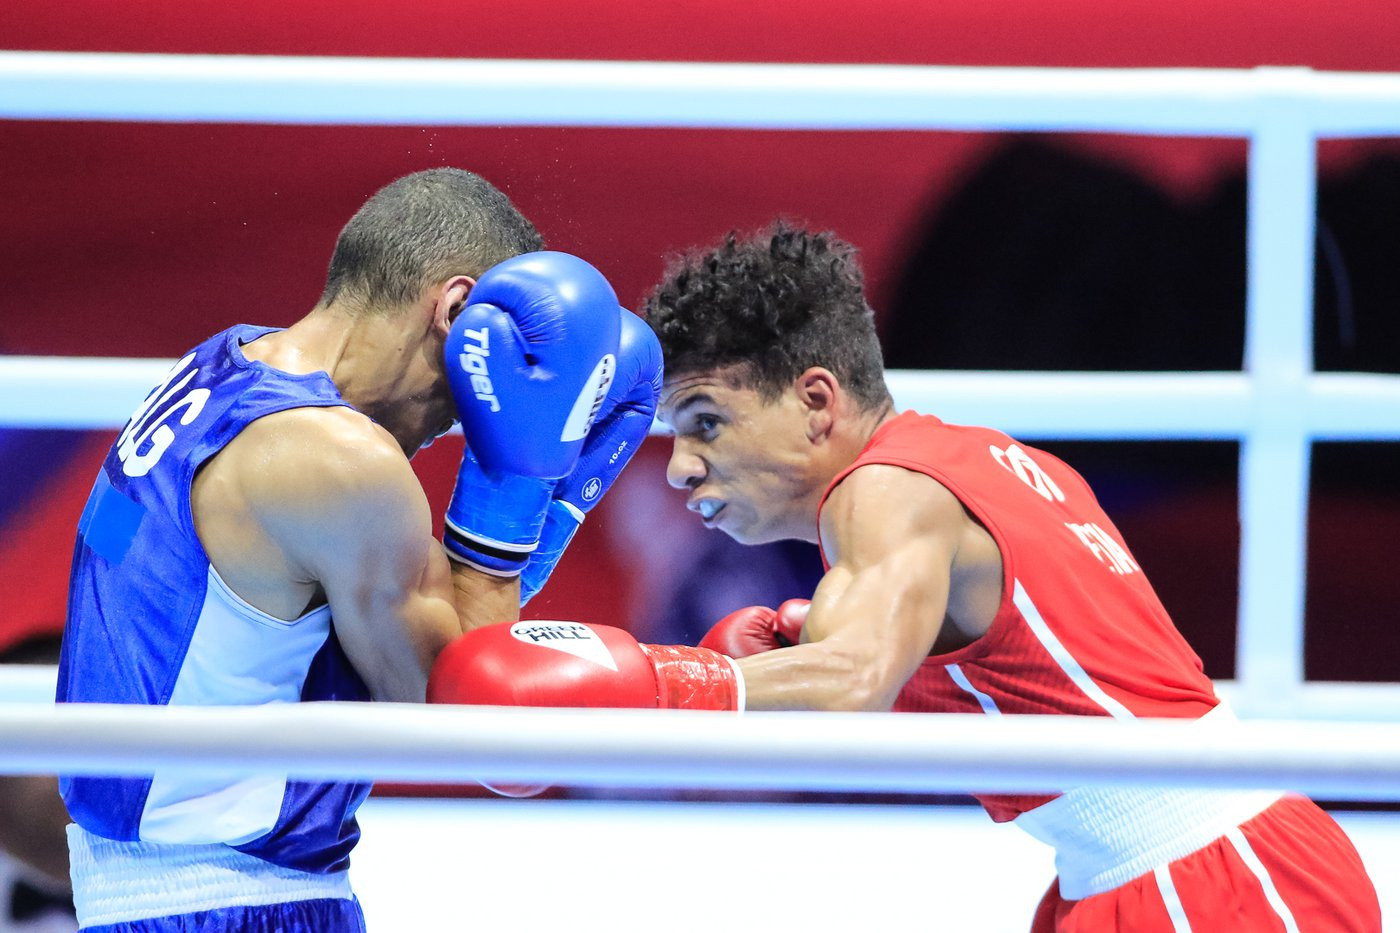 In the flyweight division, top seed and defending champion Yosvany Veitía of Cuba only just got past Mohamed Flissi of Algeria 3-2 ©Yekaterinburg 2019